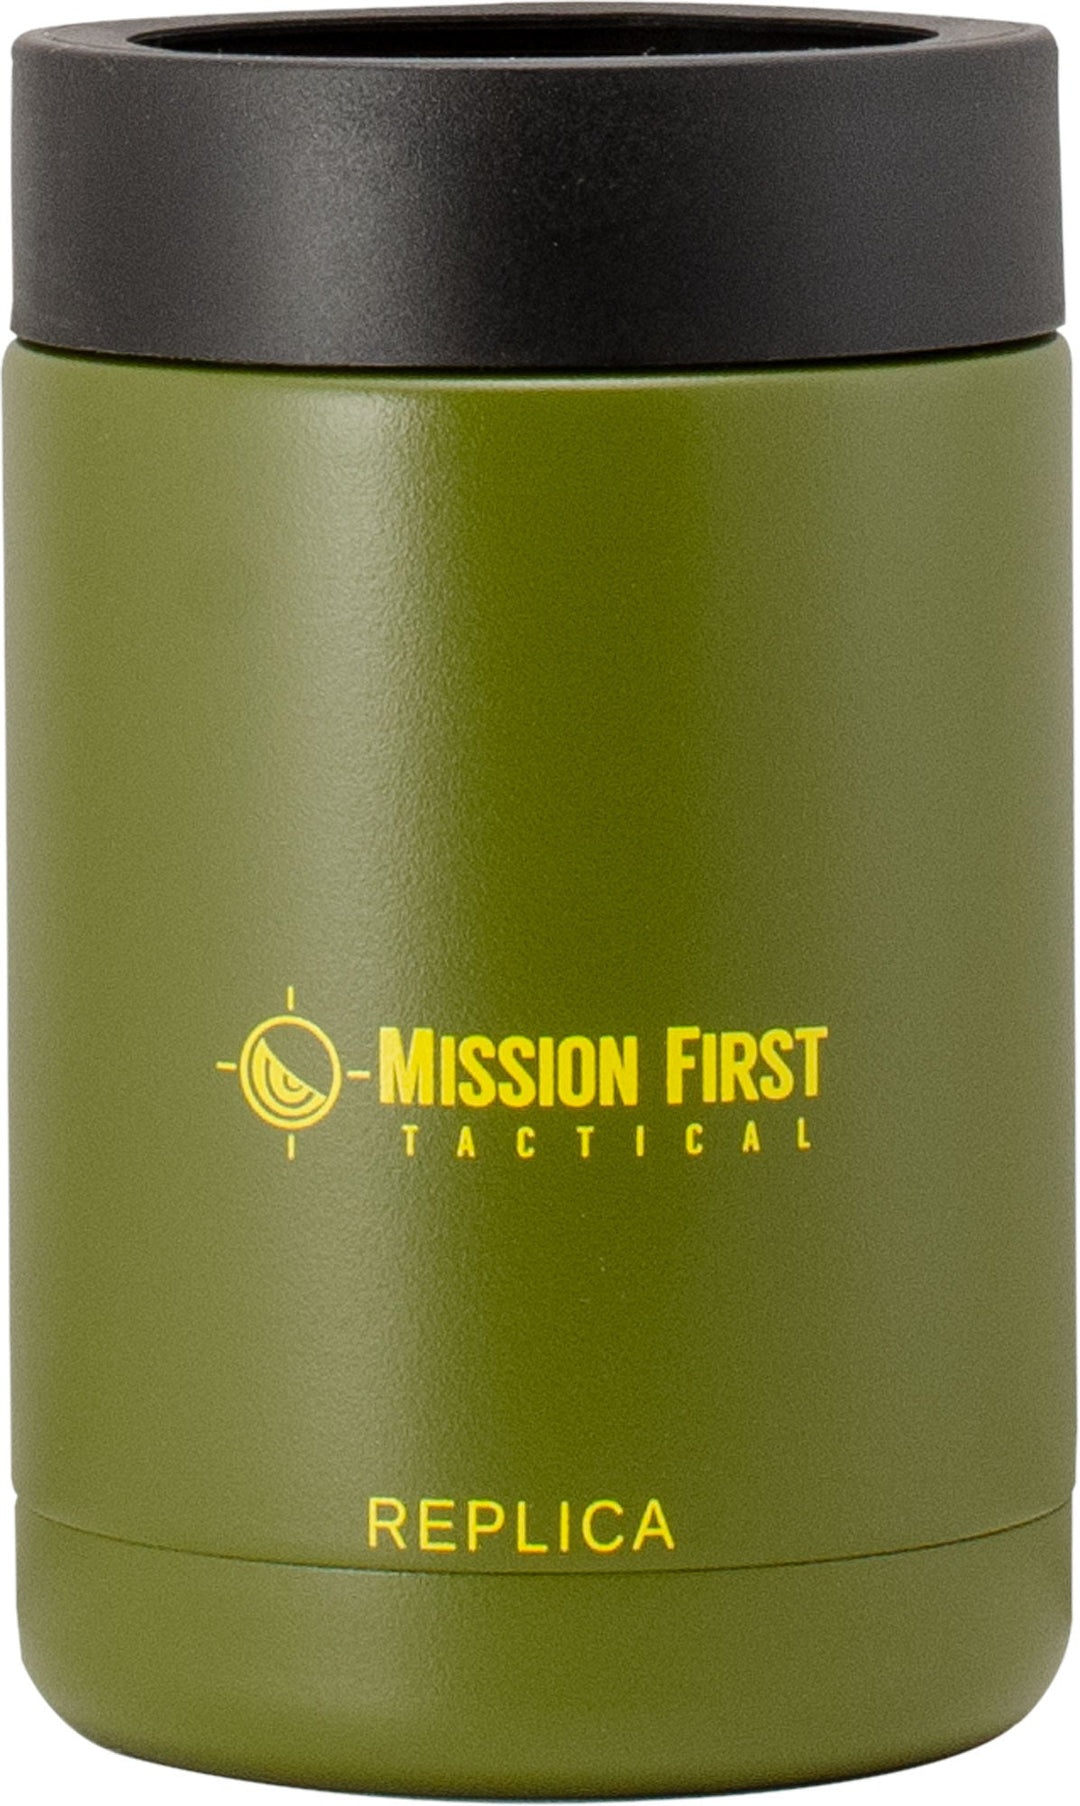 Supplies - Provisions - Drinking Tools - Mission First Tactical M107 155MM Howitzer 12-Ounce Can Cooler